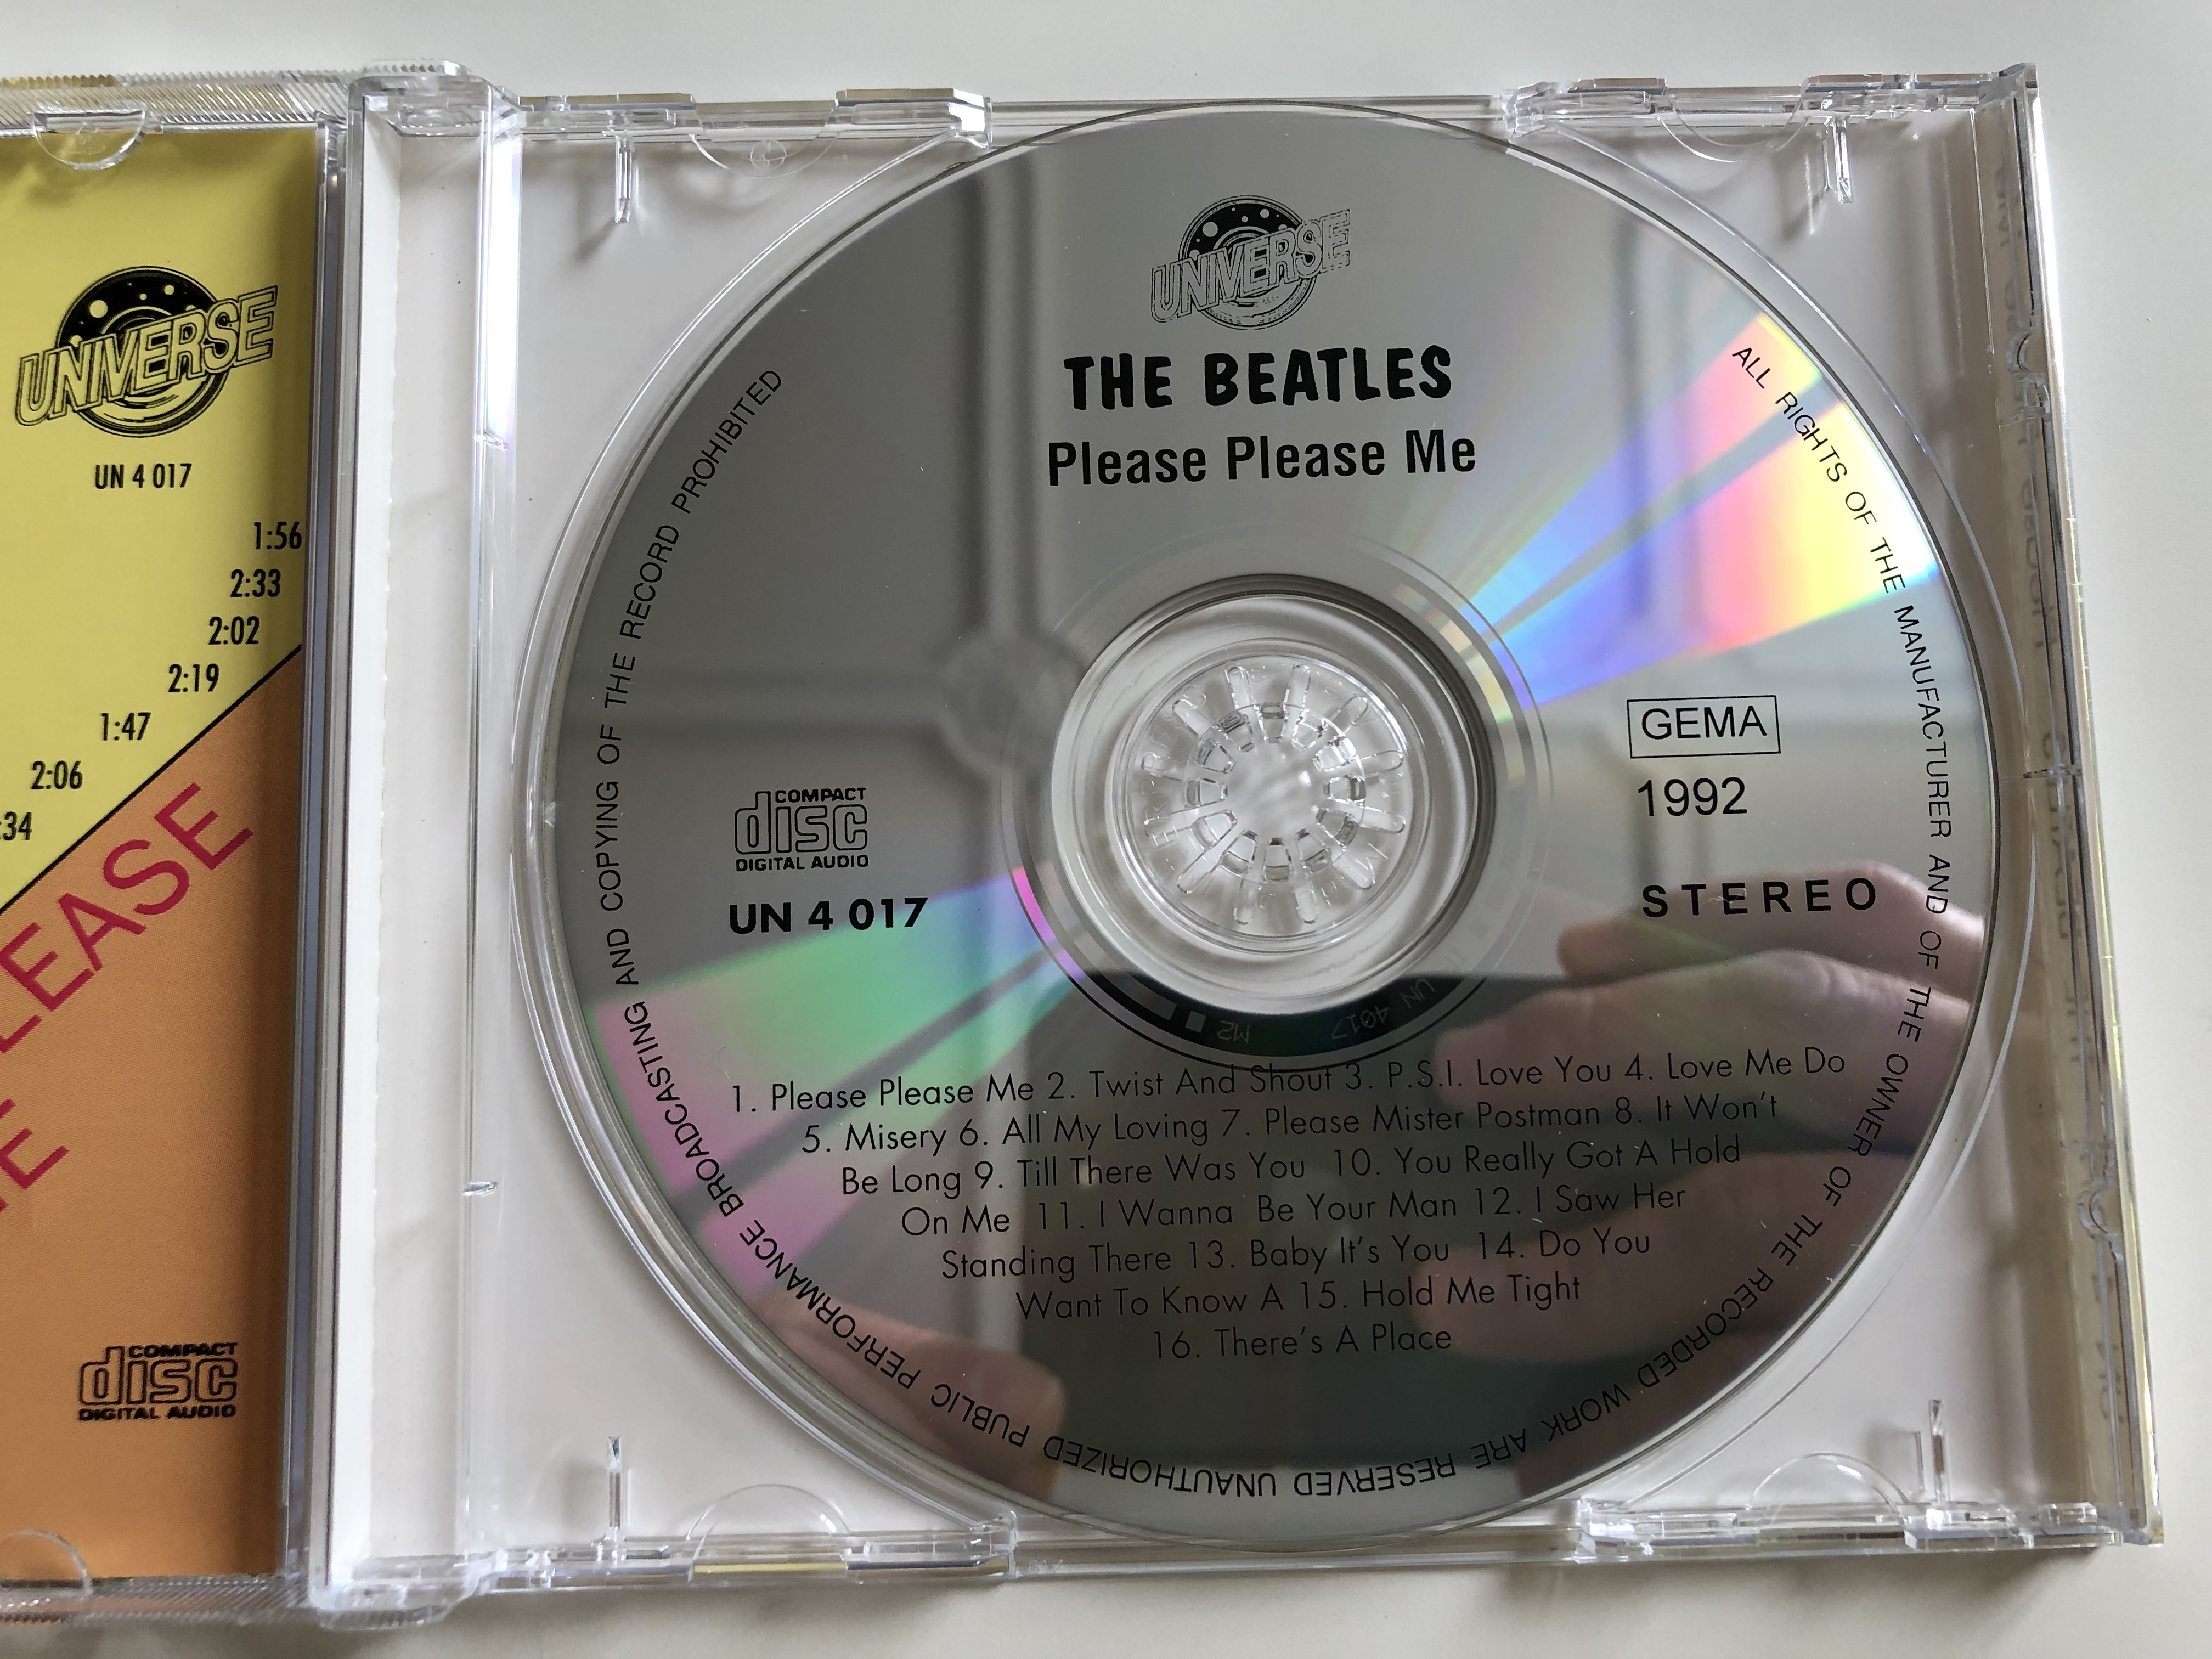 the-beatles-please-please-me-love-me-do-misery-till-there-was-you-hold-me-tight-audio-cd-1992-un-4-017-3-.jpg